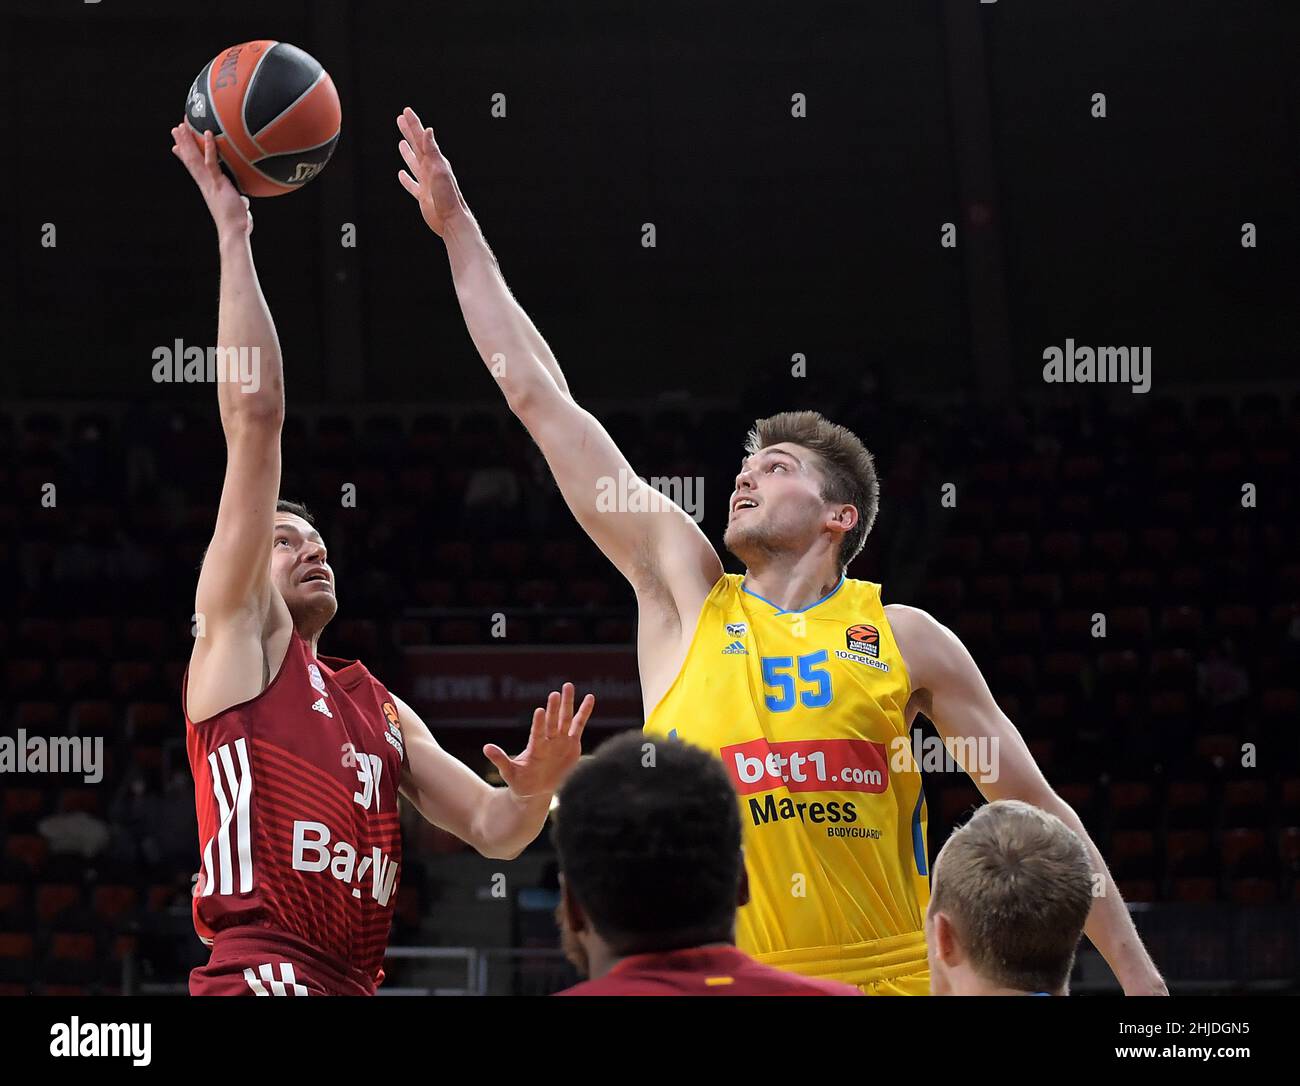 Muenchen, Germany (DE), 28 January, 2022. Pictured left to right, Zan Mark Sisko (FC Bayern Basketball), Ben Lammers (Alba Berlin) Zweikampf, Aktion, action, battle for the ball at the Basketball Euroleague, FC Bayern Muenchen - Alba Berlin. Credit: Eduard Martin/Alamy Live News Stock Photo